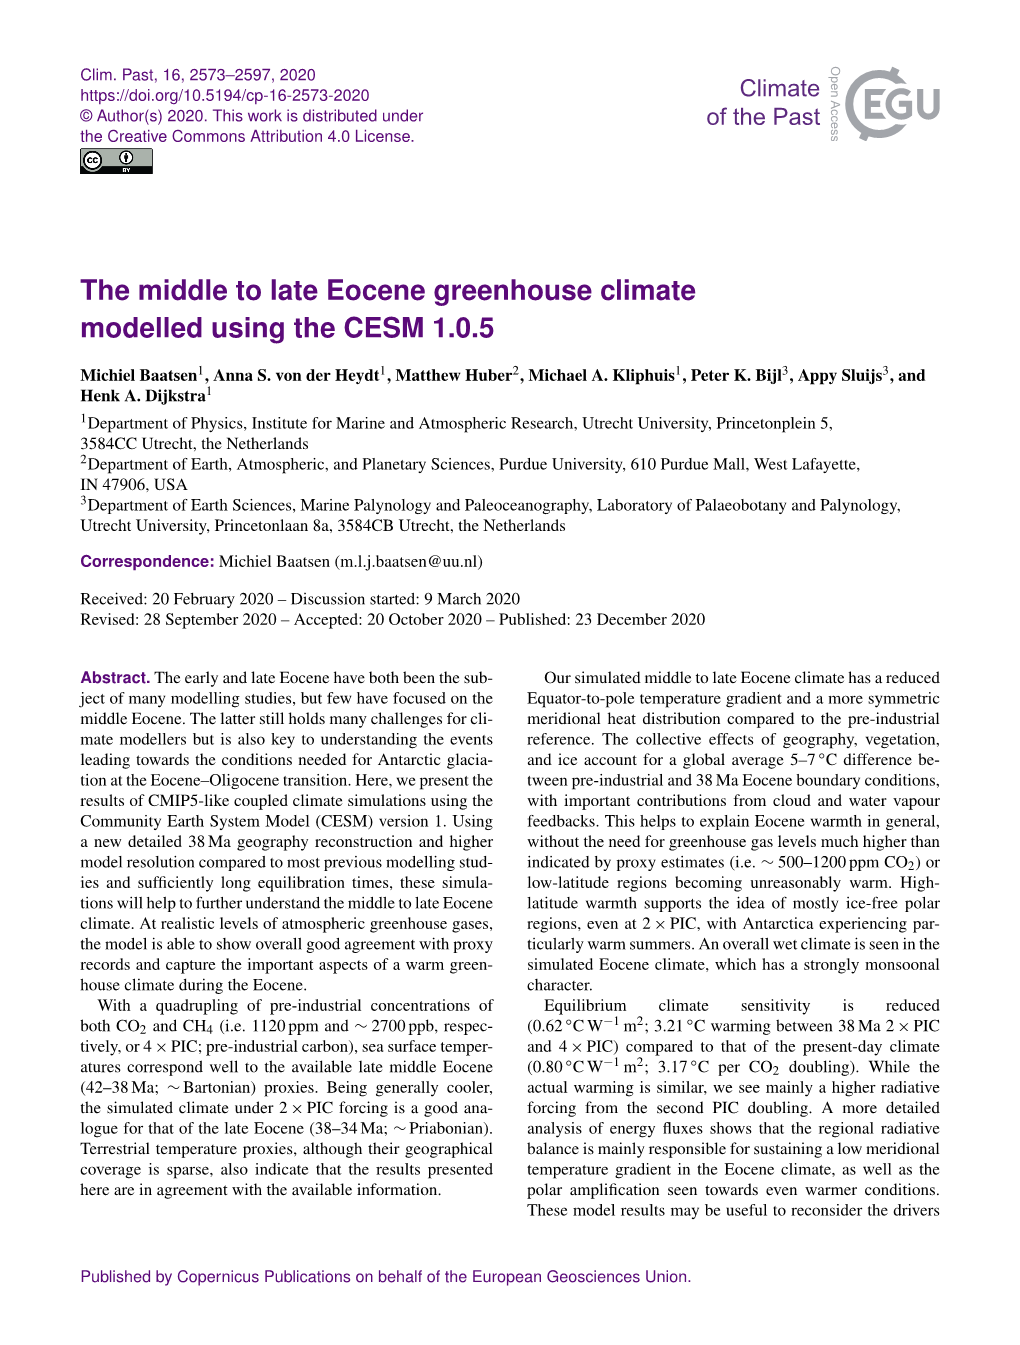 The Middle to Late Eocene Greenhouse Climate Modelled Using the CESM 1.0.5